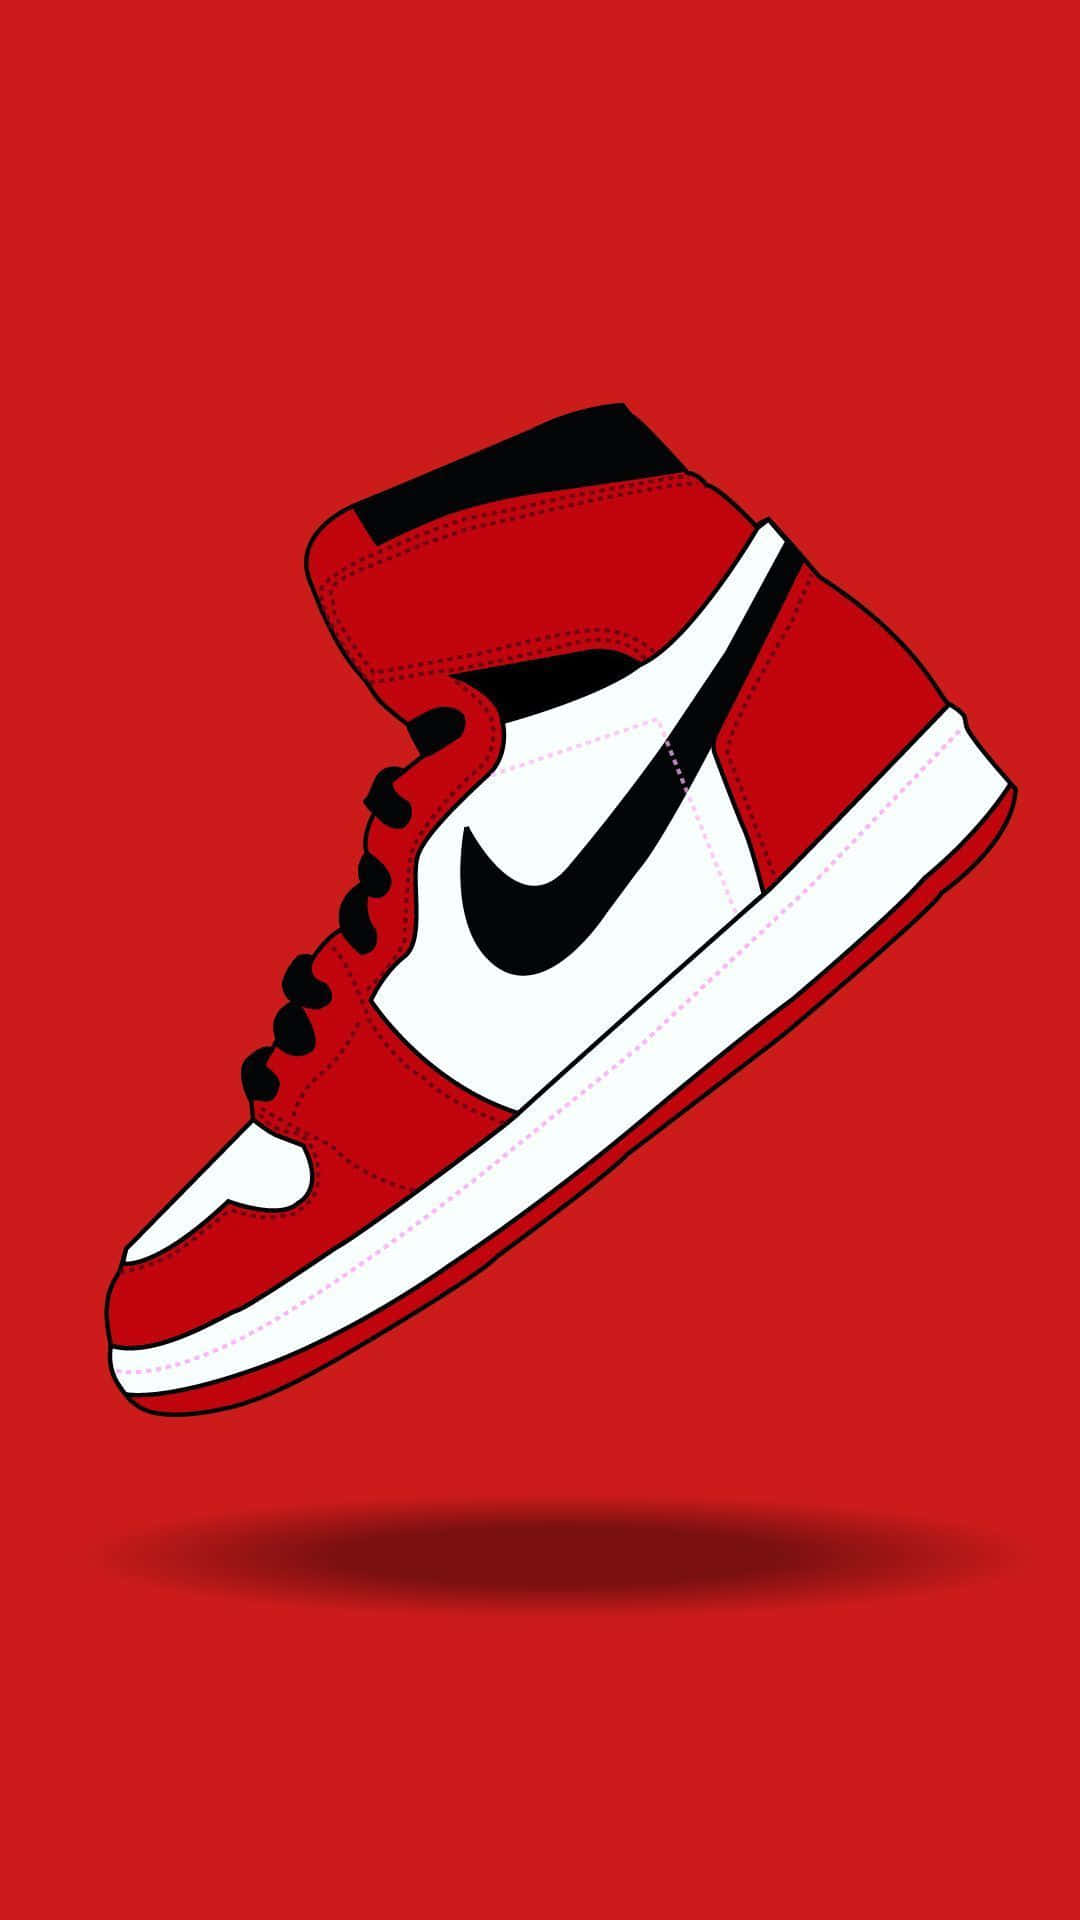 A Red And White Nike Sneaker On A Red Background Wallpaper